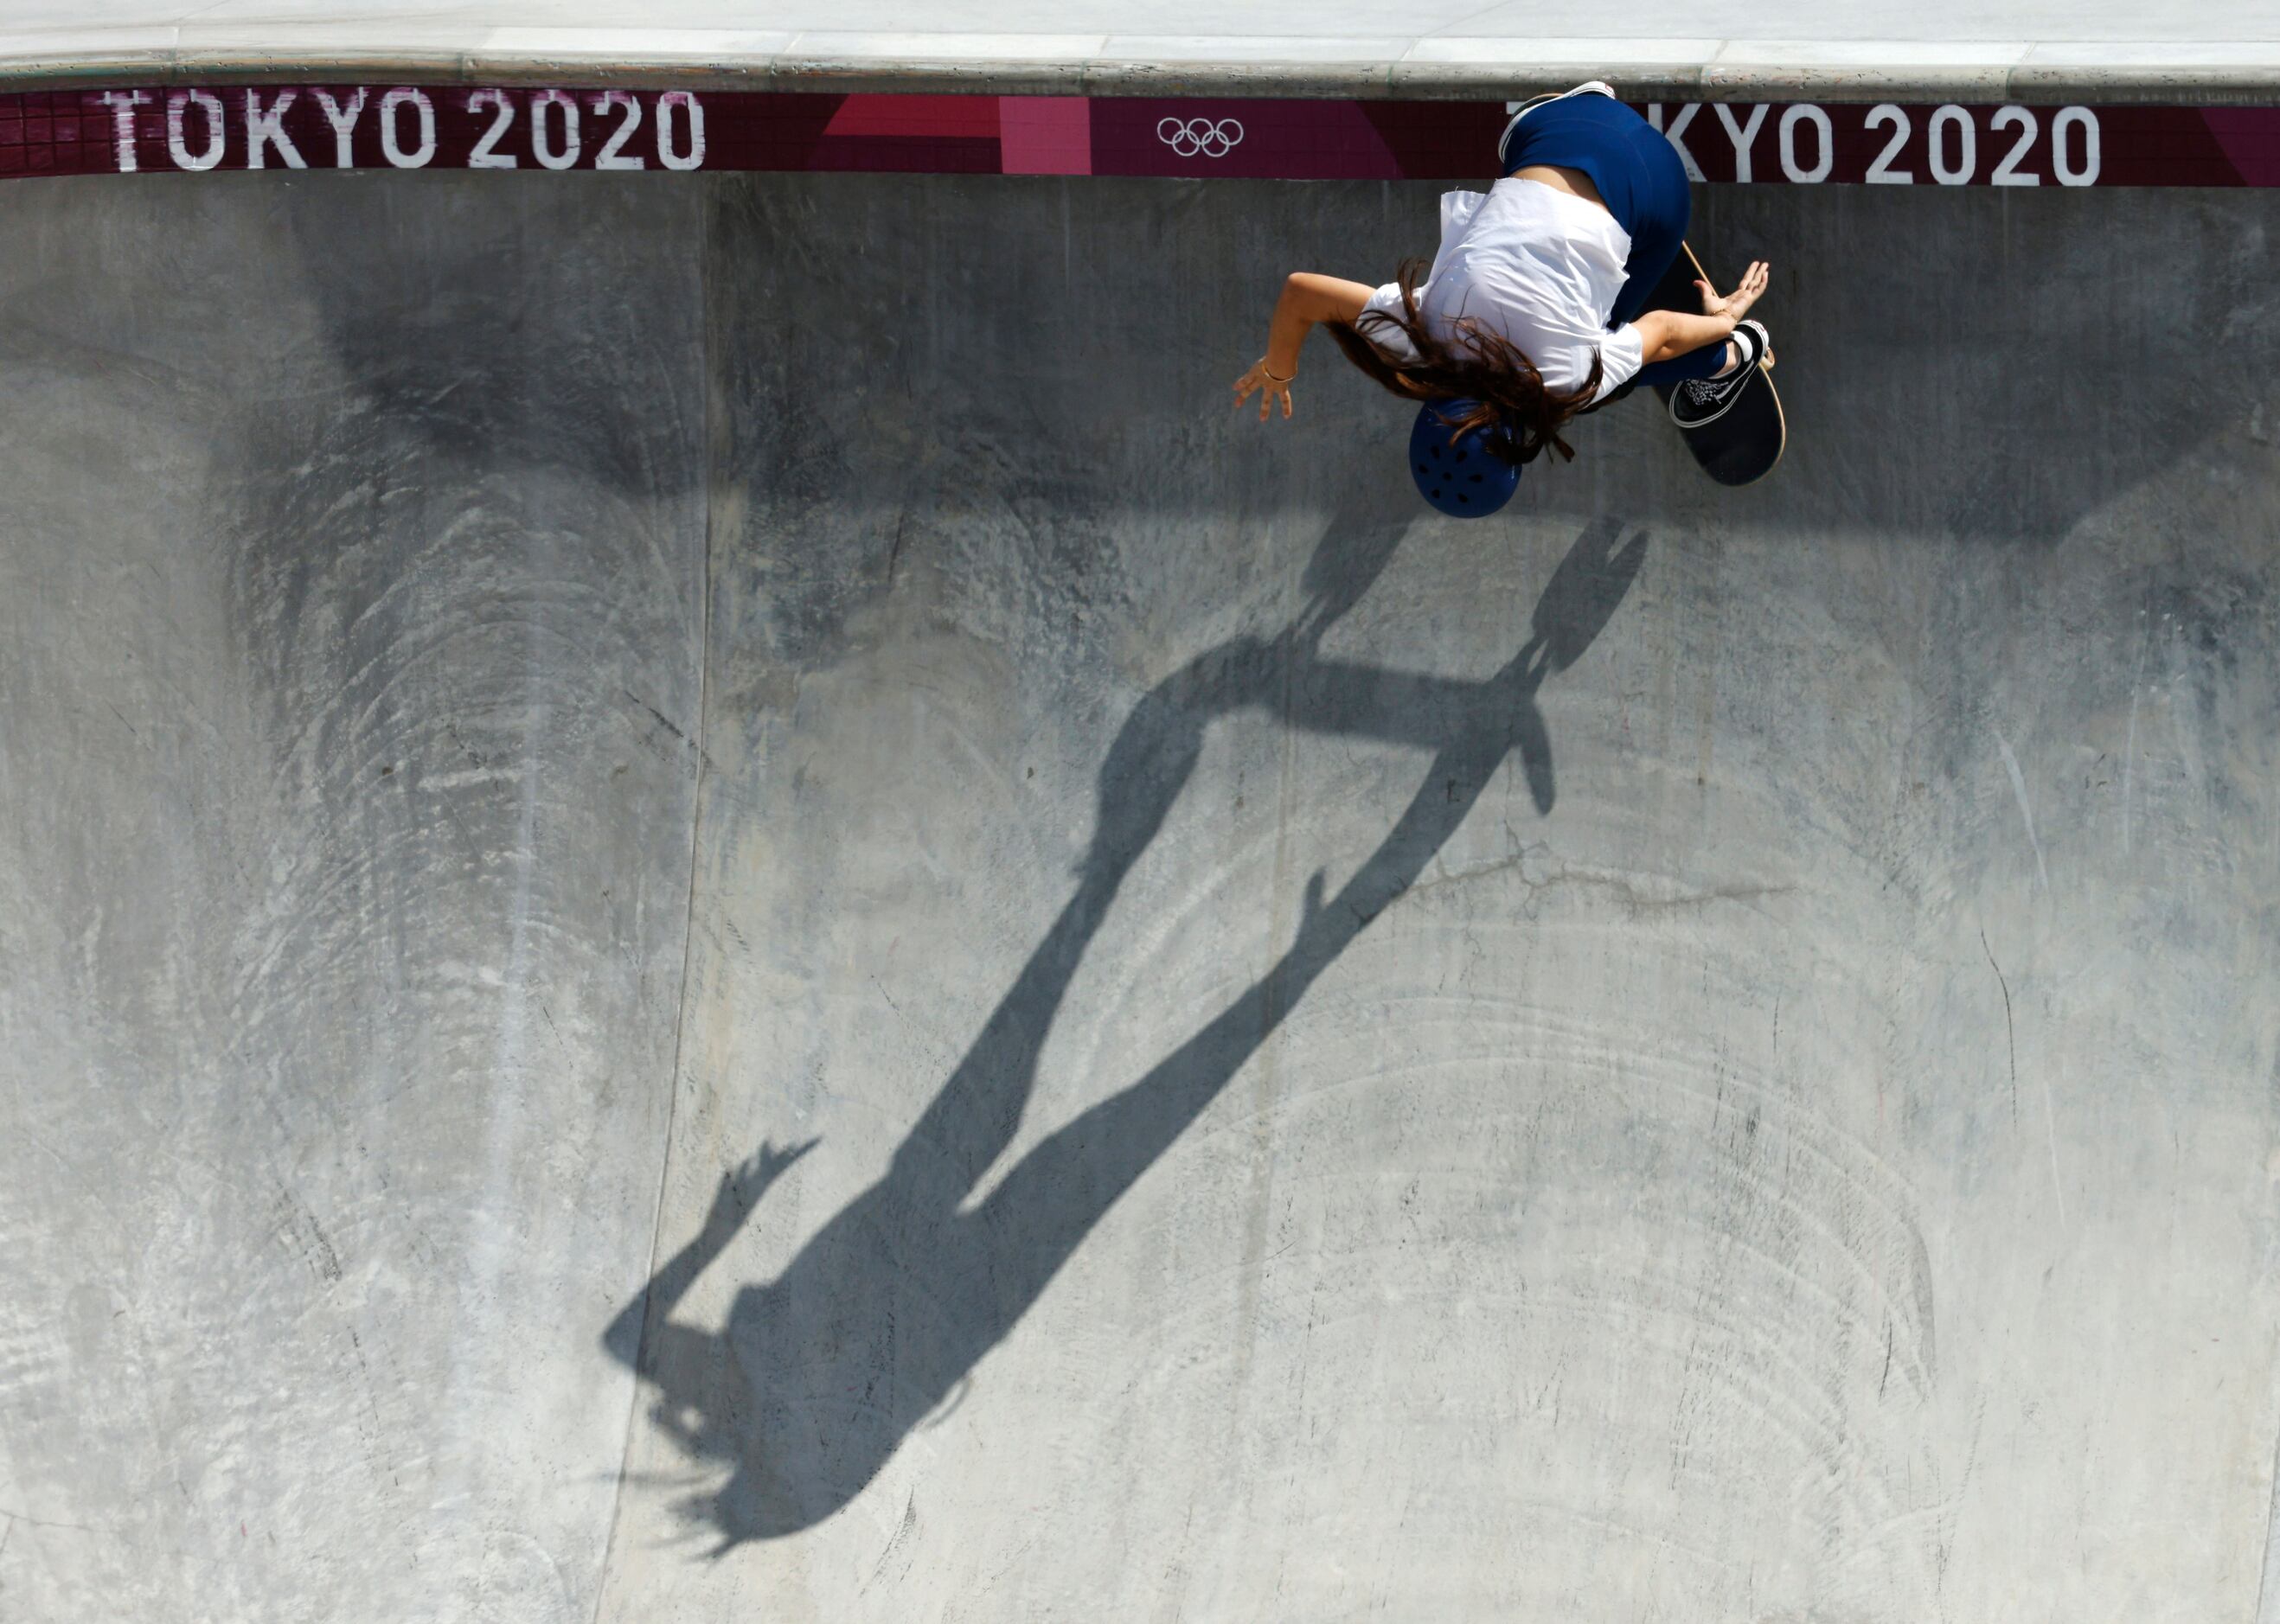 USA’s Brighton Zeuner competes during the women’s skateboarding prelims at the postponed...